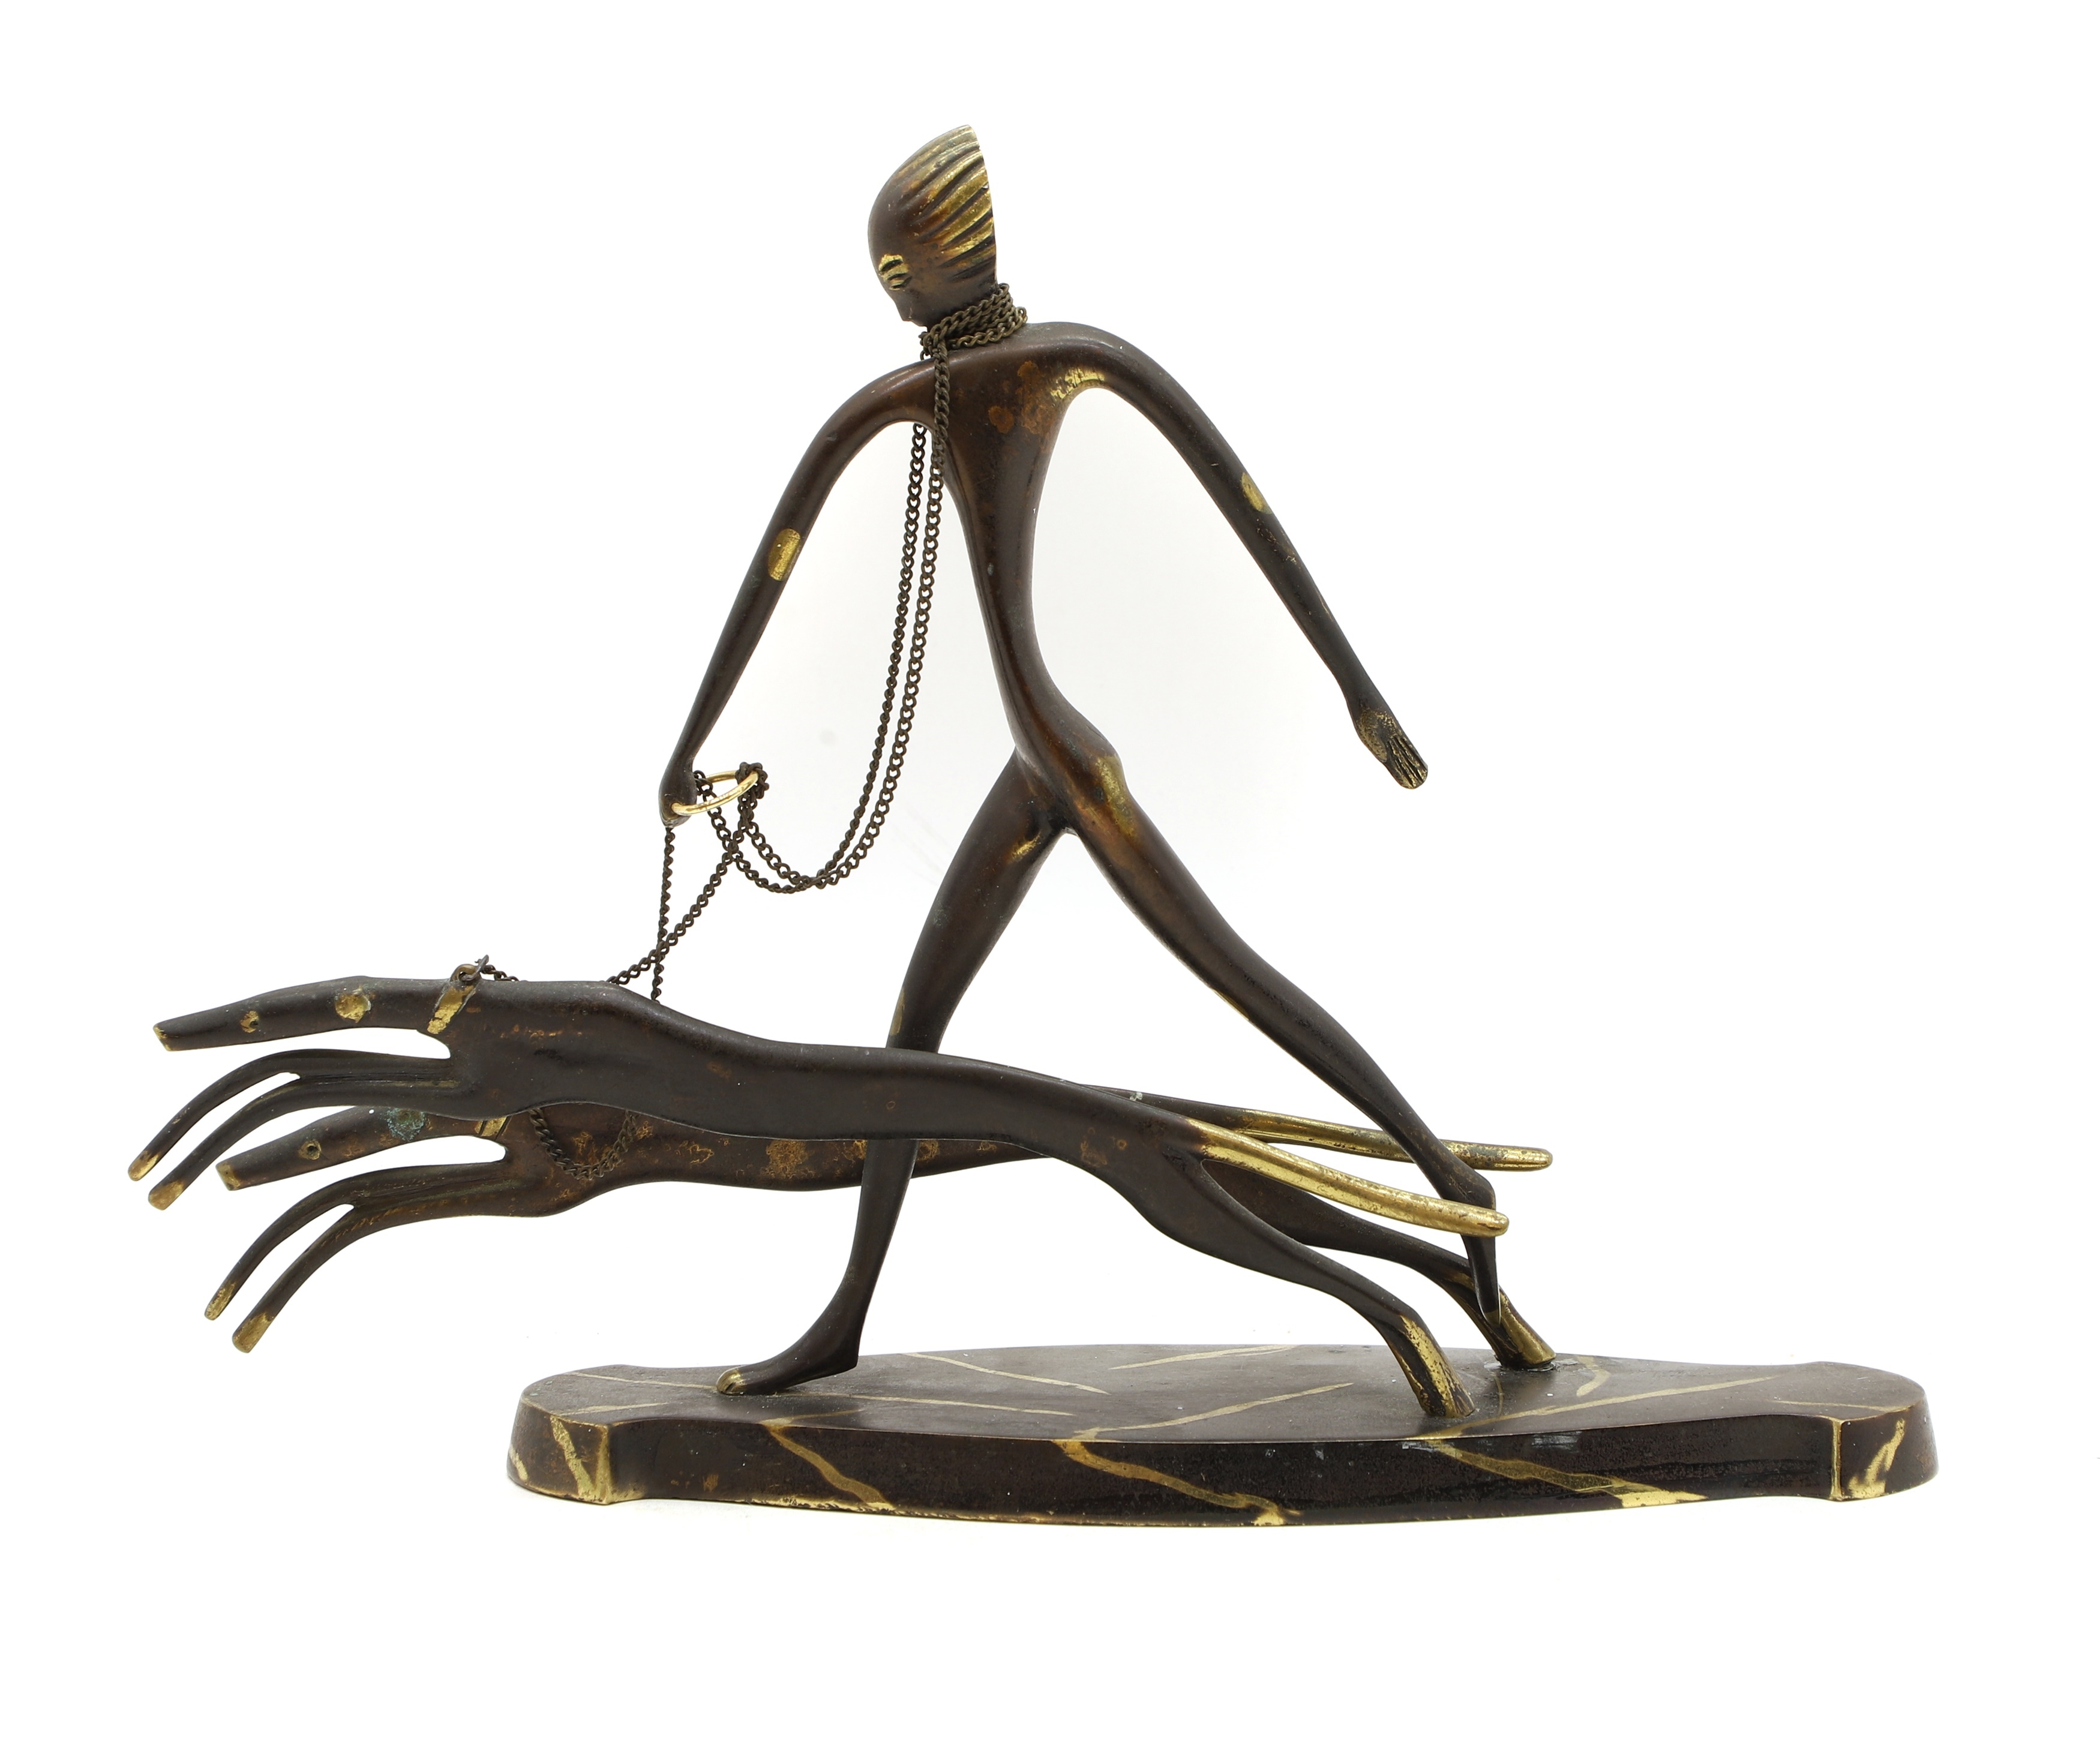 Artwork by Franz Hagenauer, 20th century in the manner of Franz Hagenauer the standing figure holding two greyhounds by chains on a shaped base